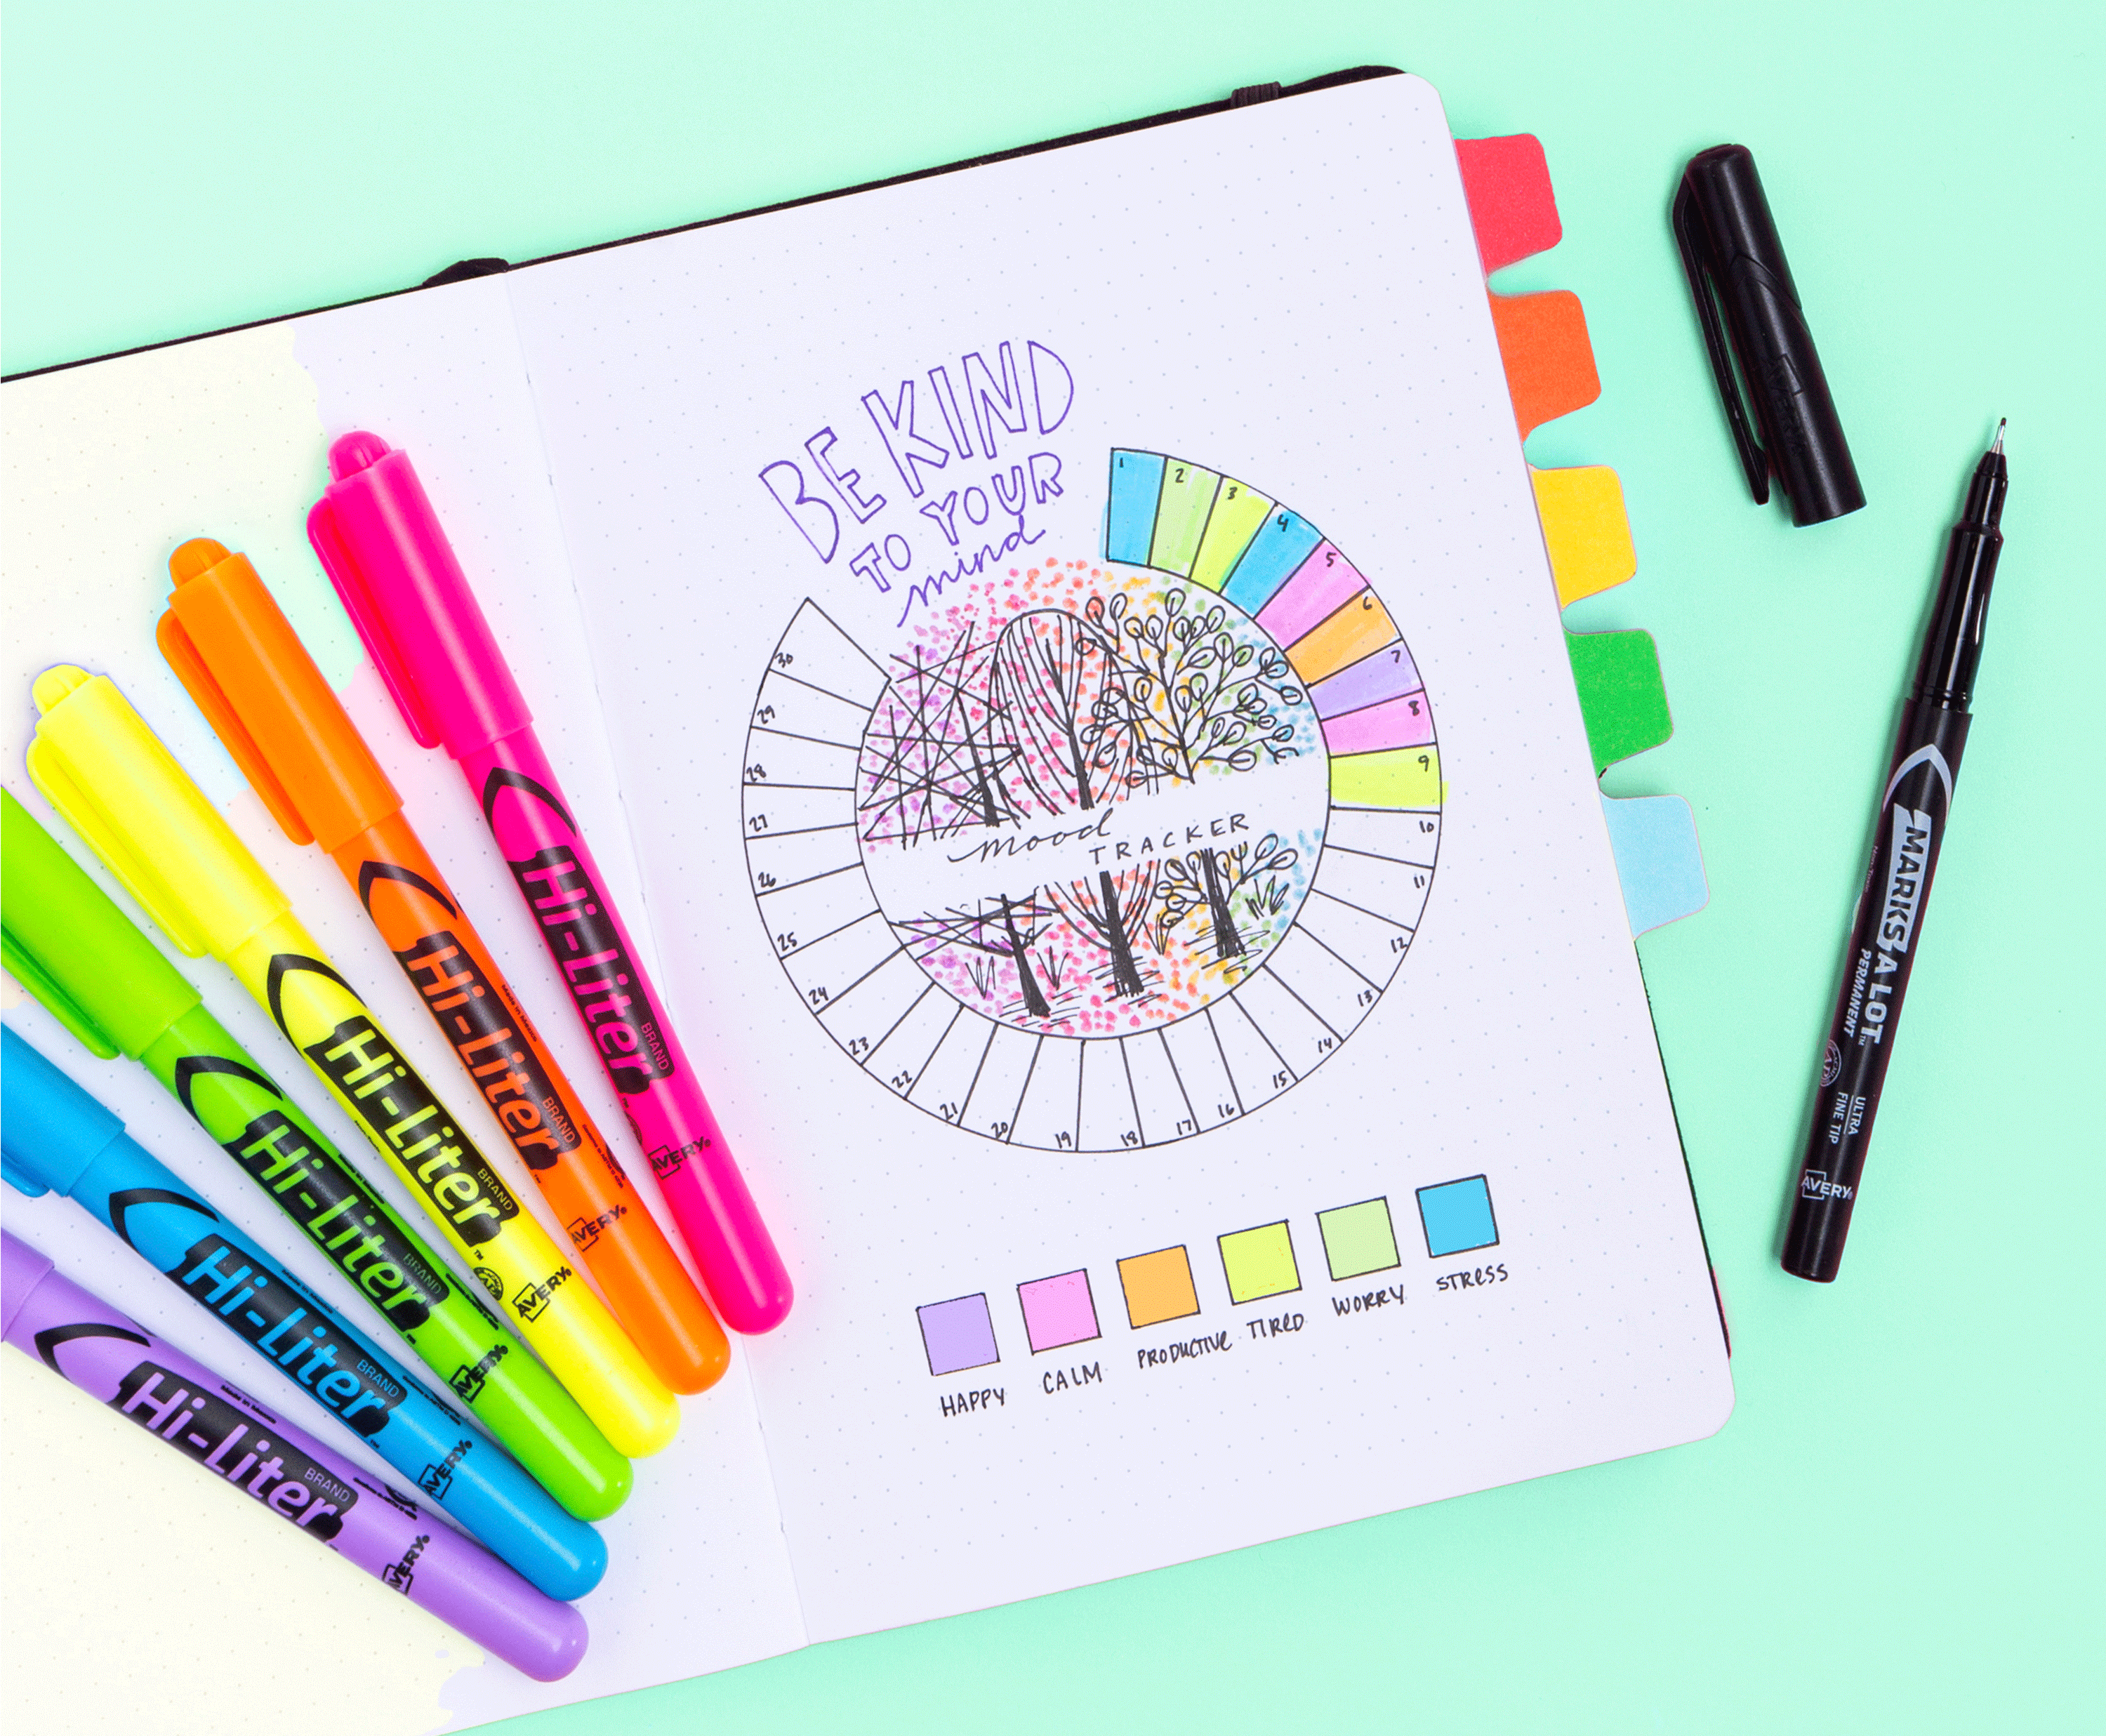 Avery® Student Planner Stickers Variety Pack, 30 Sticker Sheets